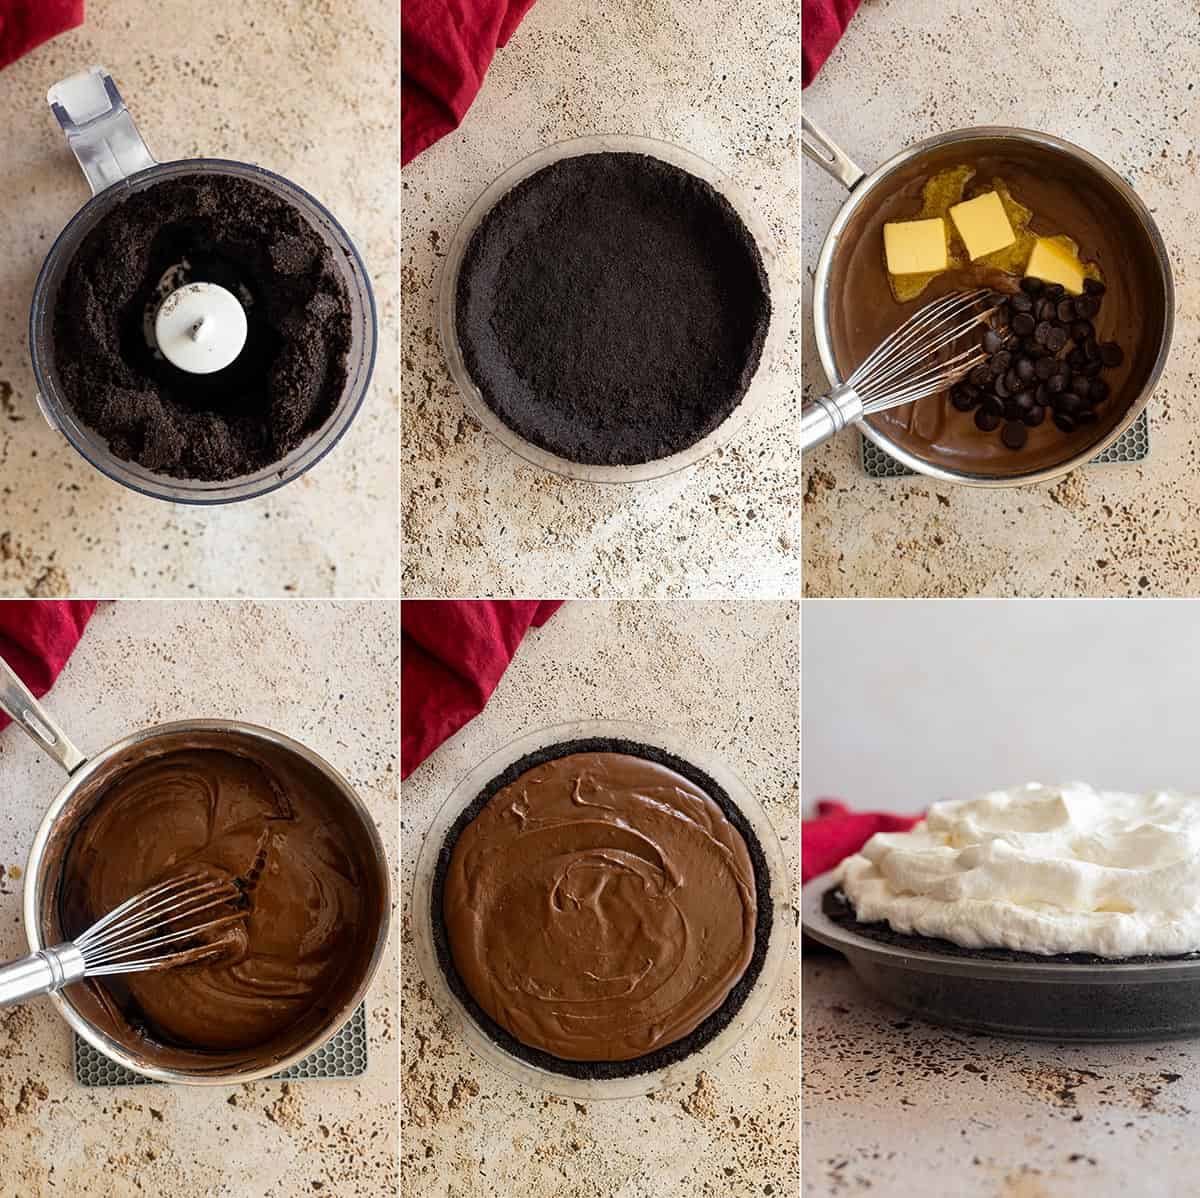 Six pictures showing how to make the pie. Pictures 1 and 2 showing the crust. 3 and 4 making the filling. 5 adding to the pie crust and 6 topping with whipped cream.